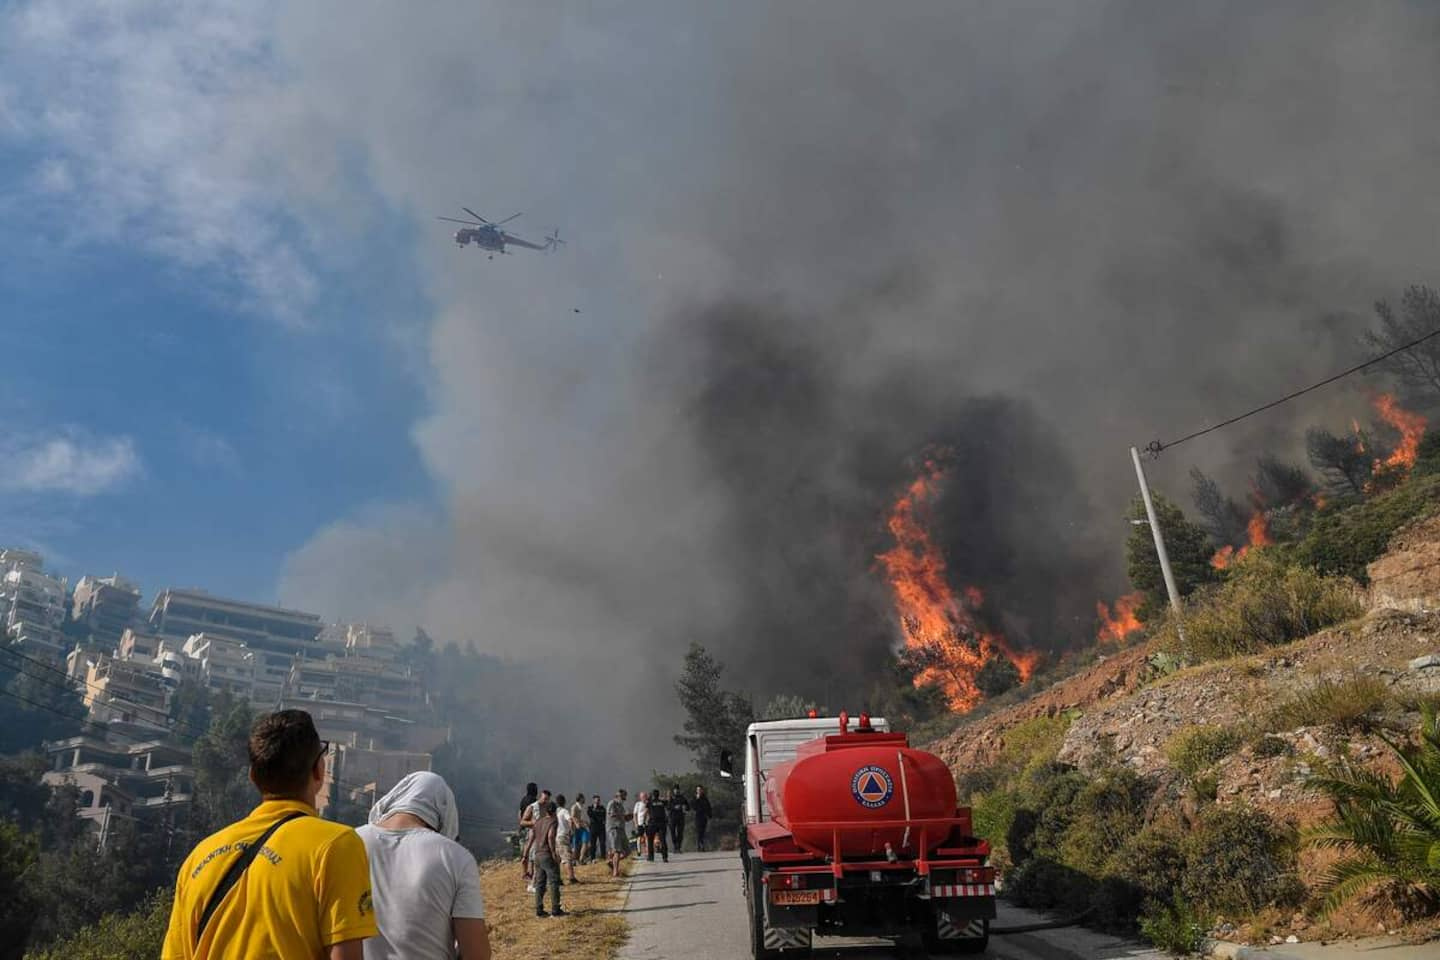 Greece: A forest fire threatens a large olive grove in the center of the country